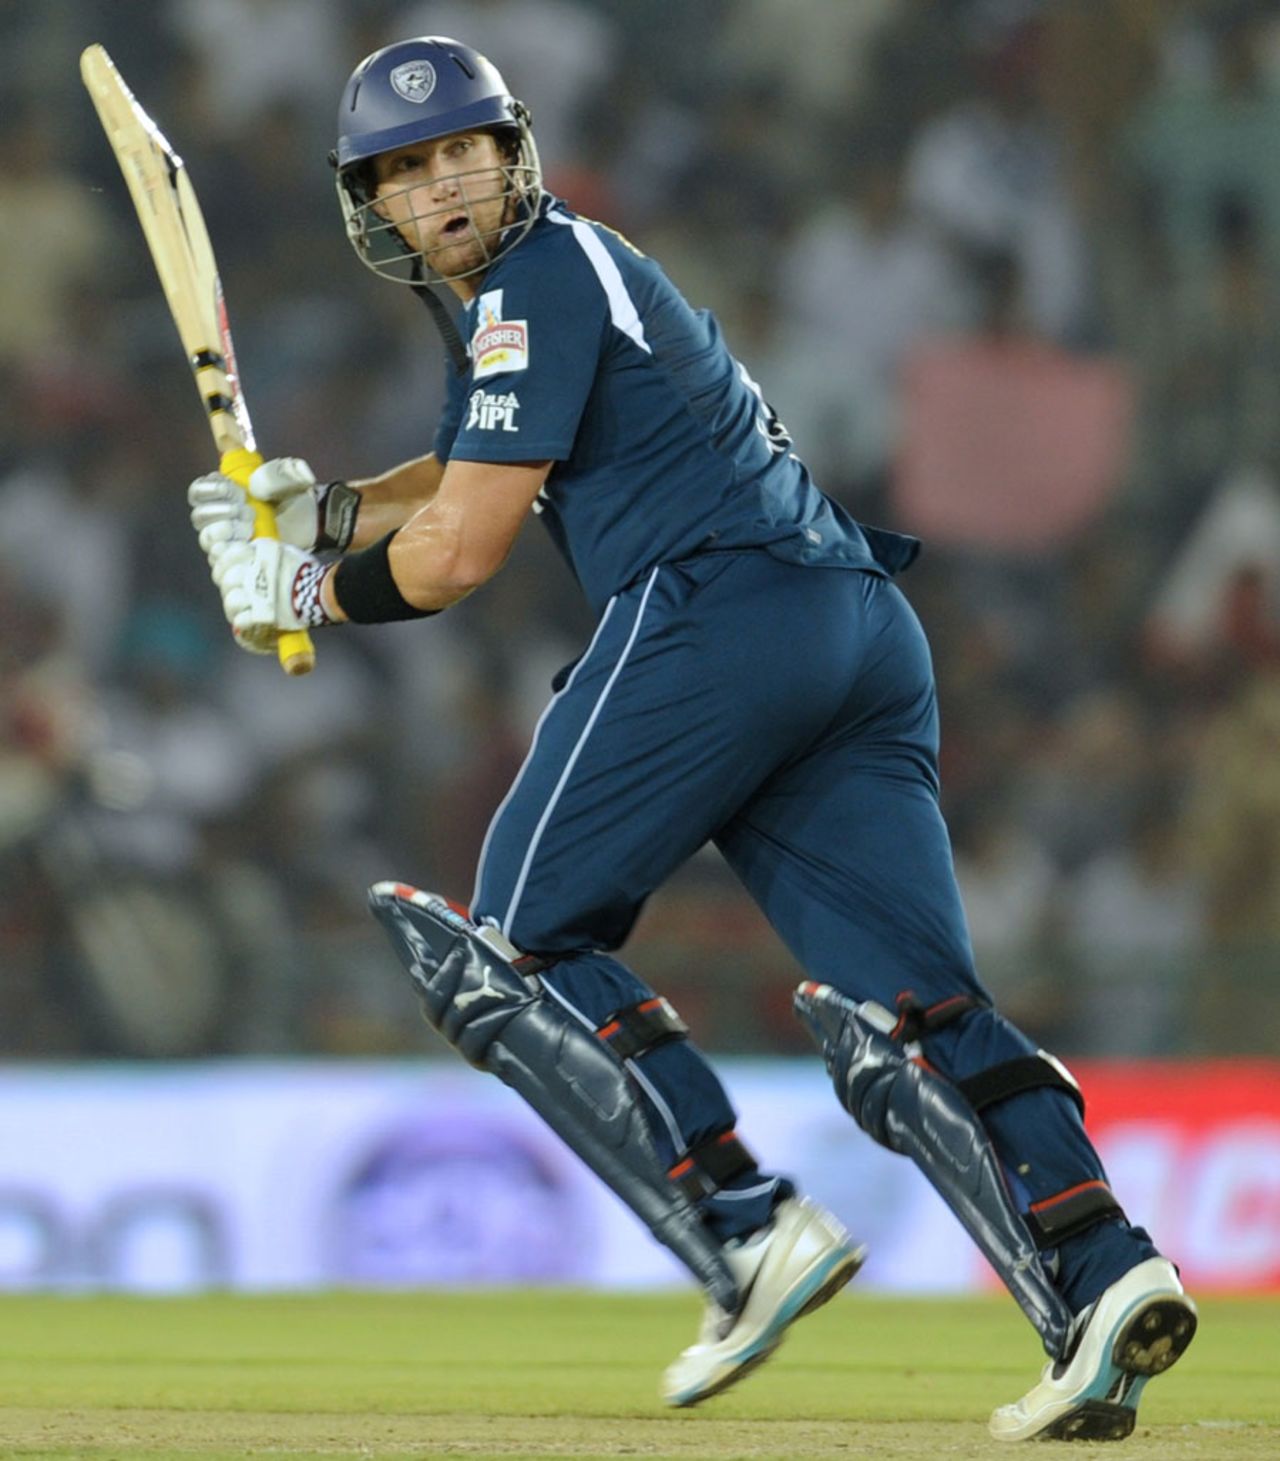 Cameron White made his fifth half-century in eight innings, Kings XI Punjab v Deccan Chargers, IPL, Mohali, May 13, 2012 